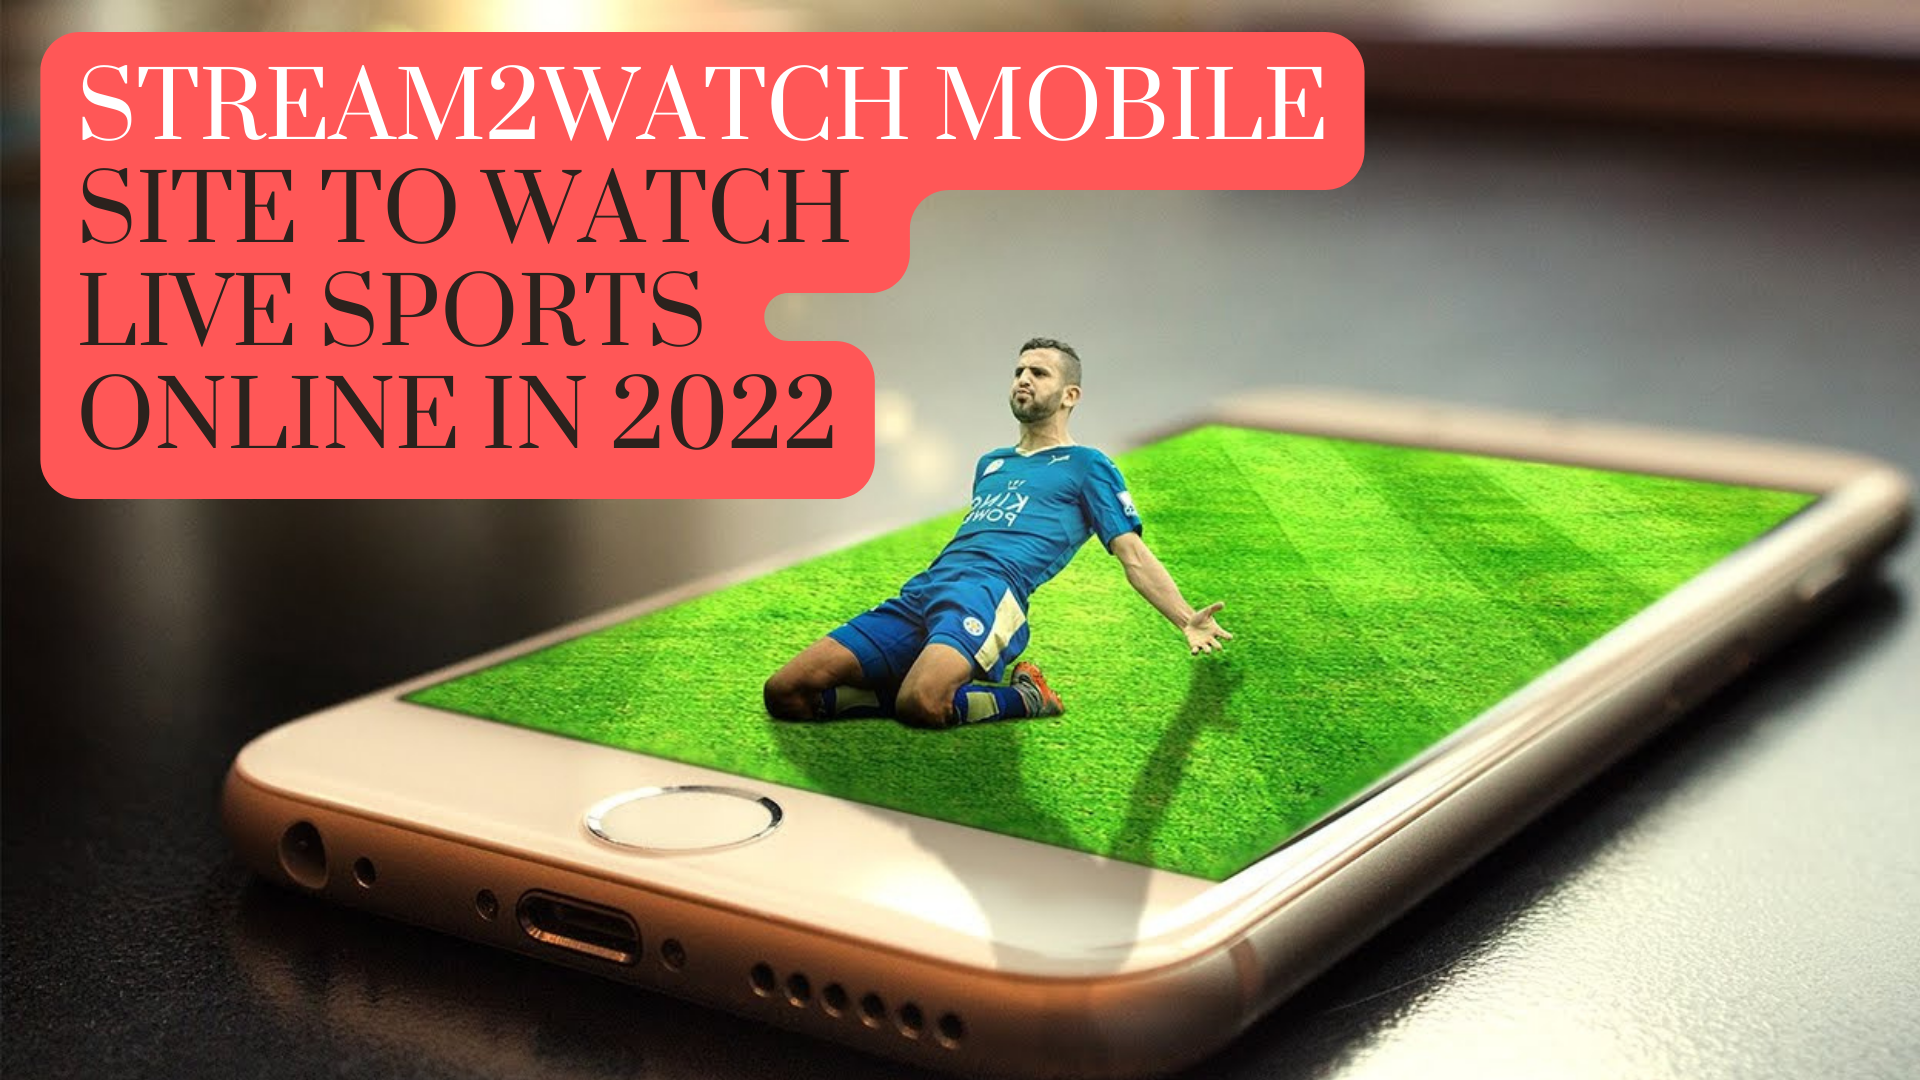 Stream2watch Mobile Site To Watch Live Sports Online In 2022